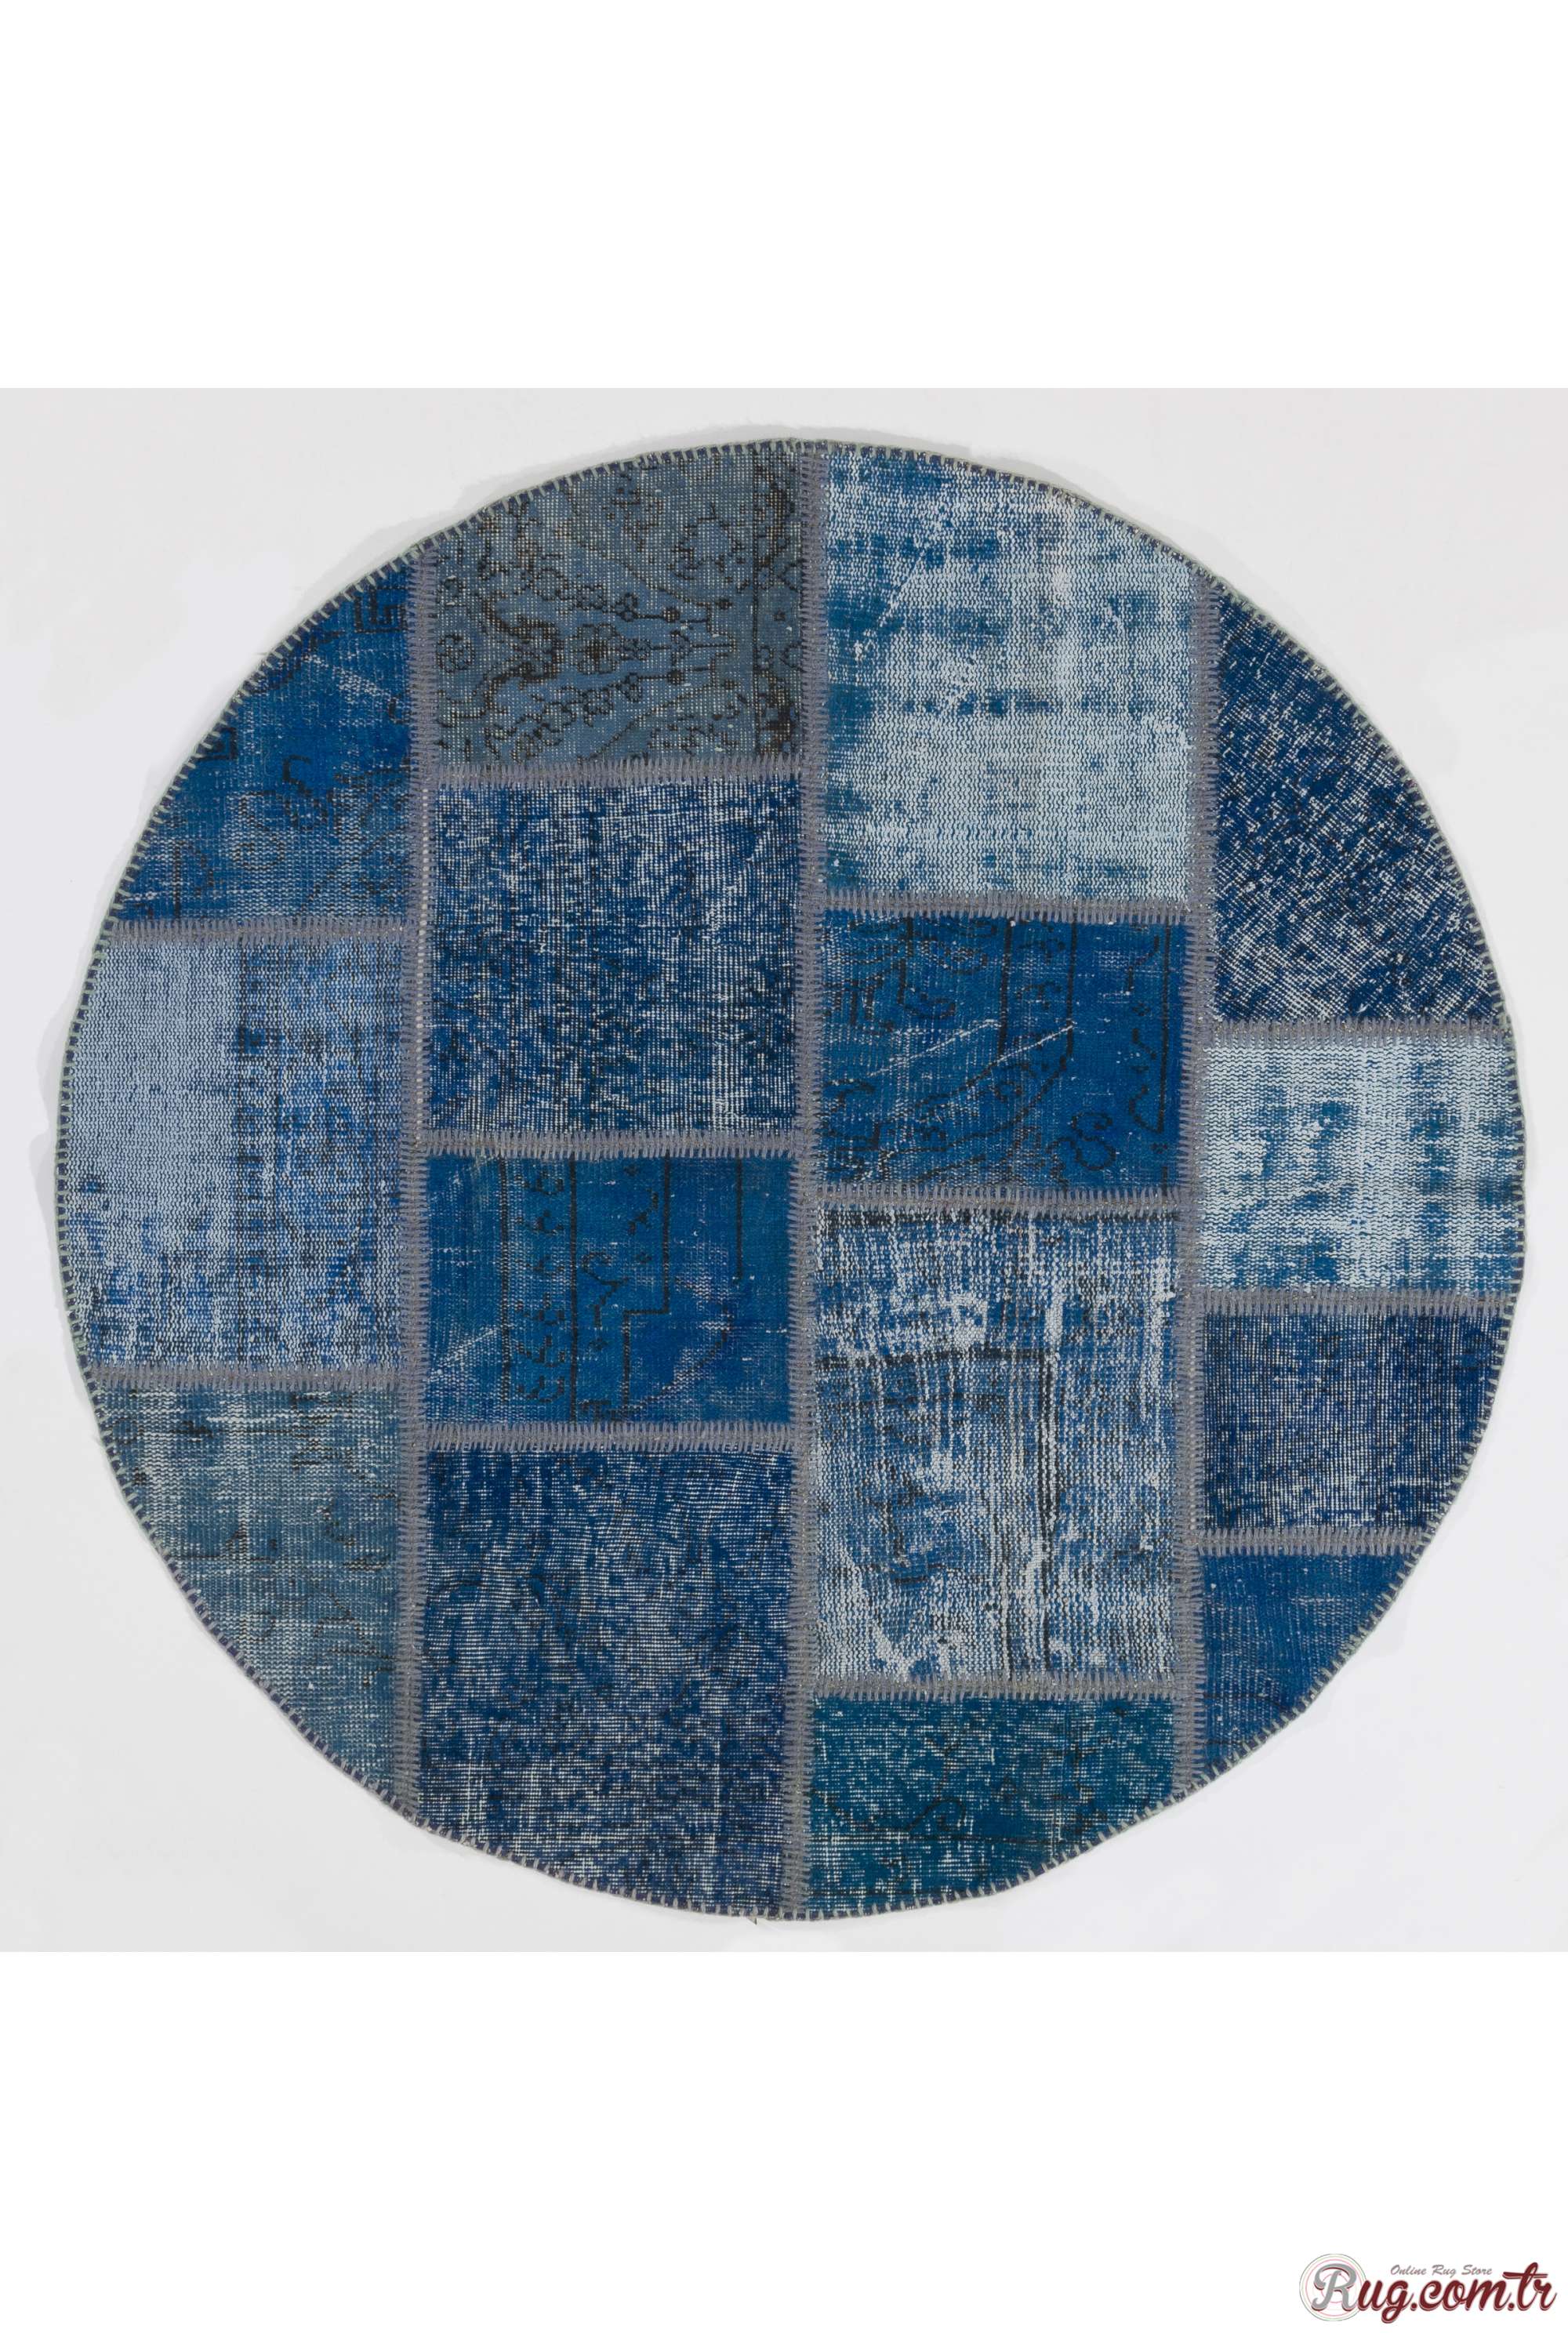 https://rug.com.tr/image/cache/catalog/products/patchwork/circular-round-blue-color-patchwork-rug-D391/150x150-D391-1-2000x2985_2.jpg